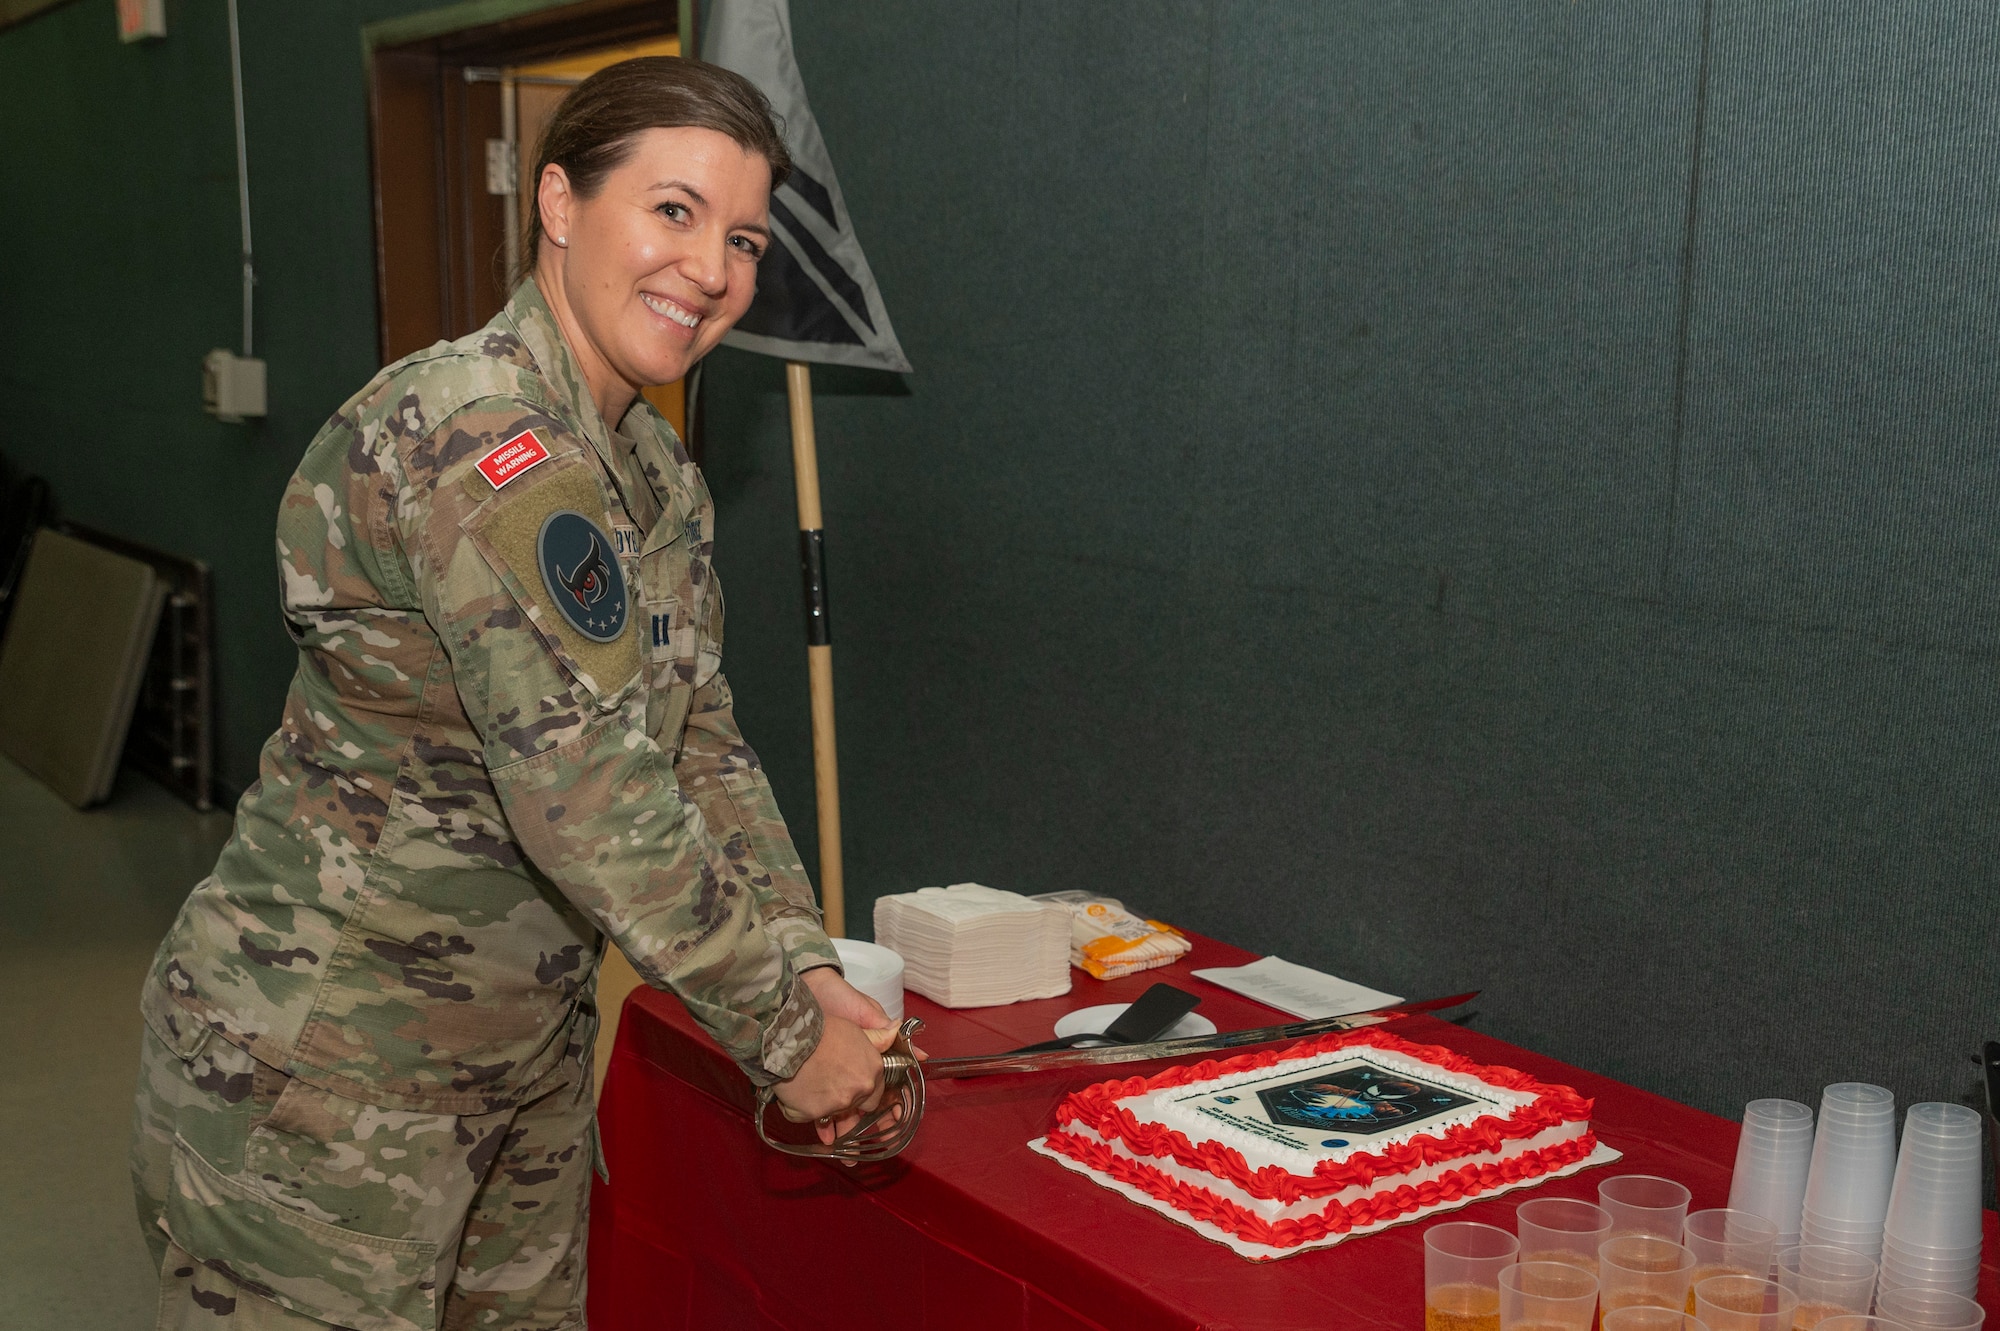 U.S. Space Force Capt. April Dybal, 5th Space Warning Squadron Detachment 3 commander, cuts a cake during her unit’s activation ceremony at Osan Air Base, Republic of Korea, Oct. 27, 2023.